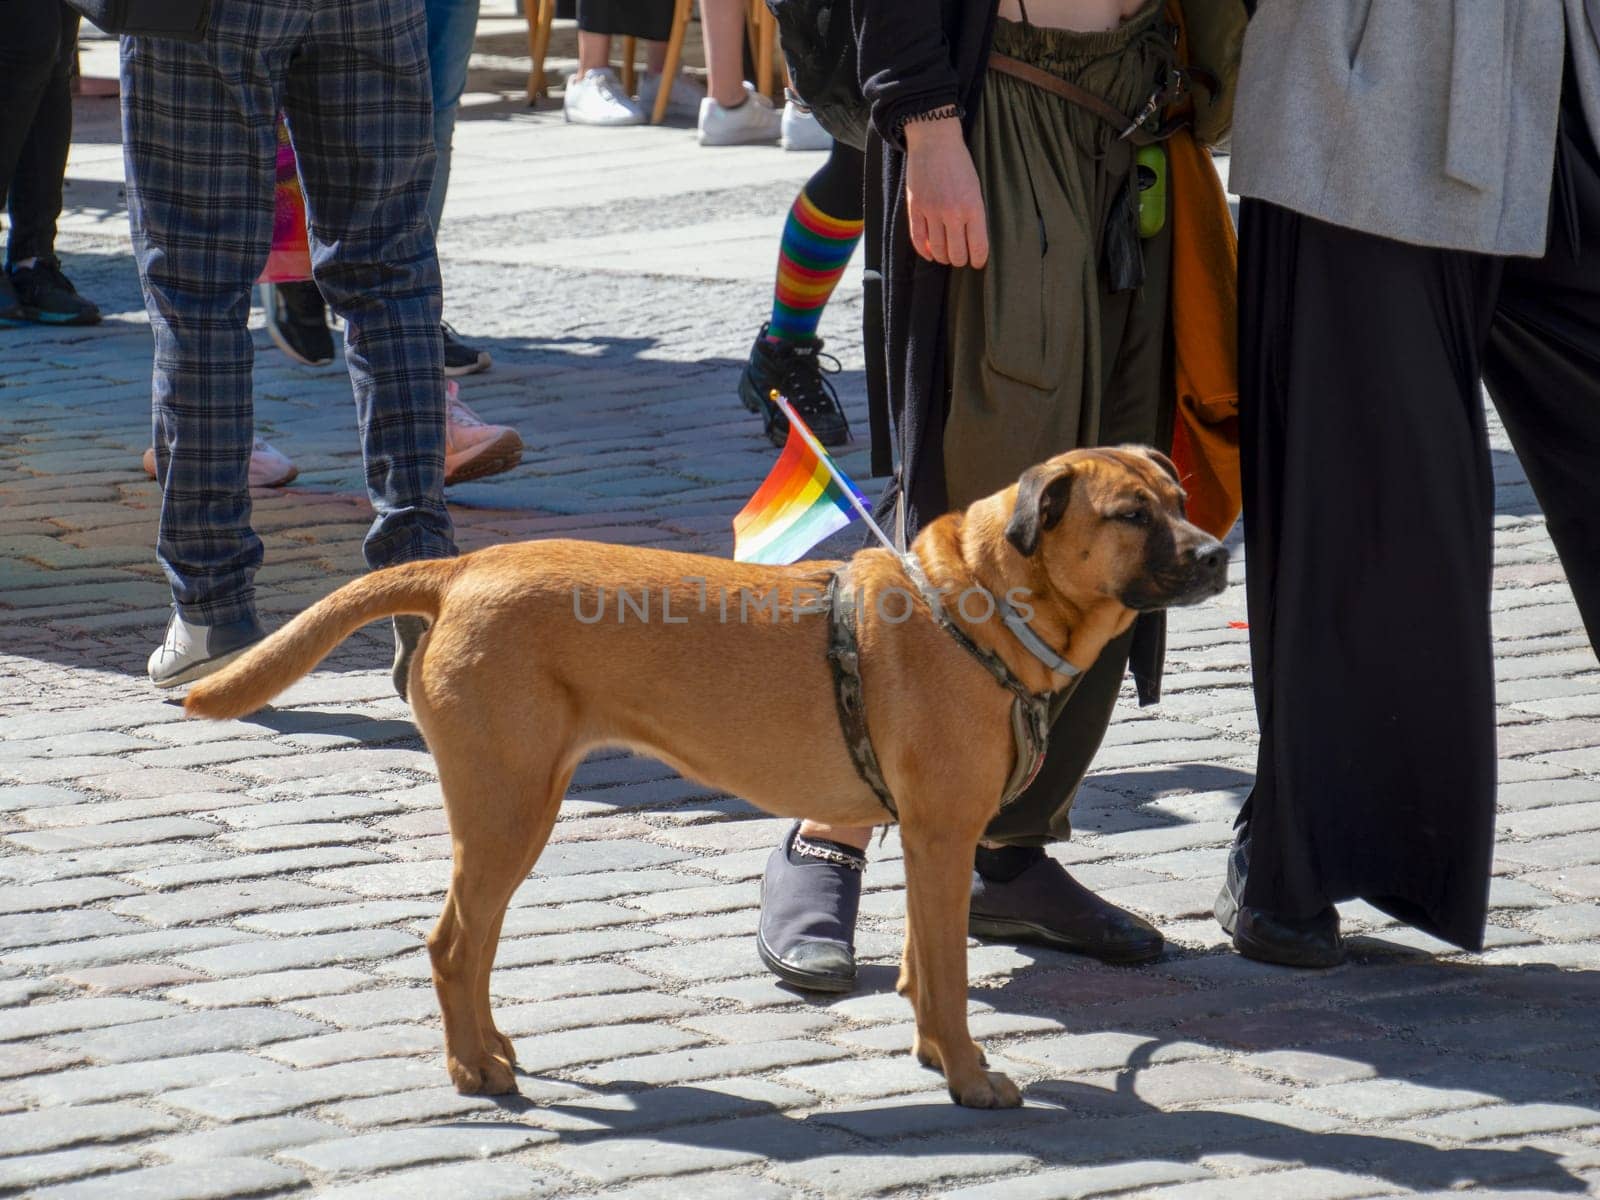 A brown dog takes part in the annual gay parade of the LGBT community with a bright scarf around his neck. gay pride parade of freedom and diversity, happy participants walking. Baltic Pride is an annual LGBT festival